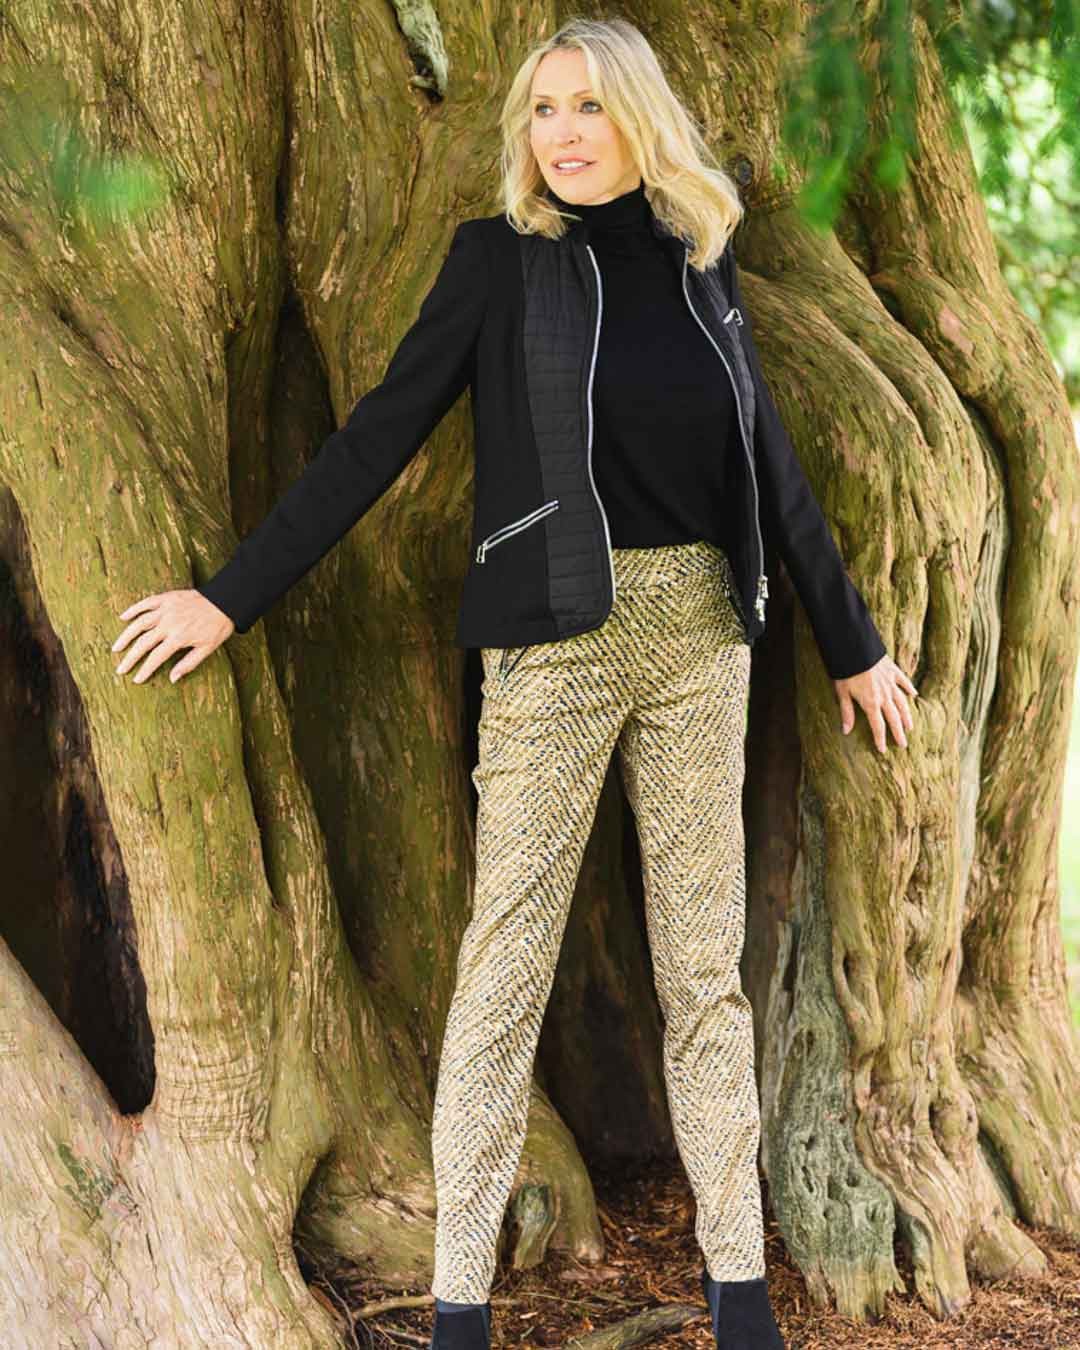 I'cona Luxe Quilted Jacket in Black with the Robell Nena Abstract herringbone trouser worn by model